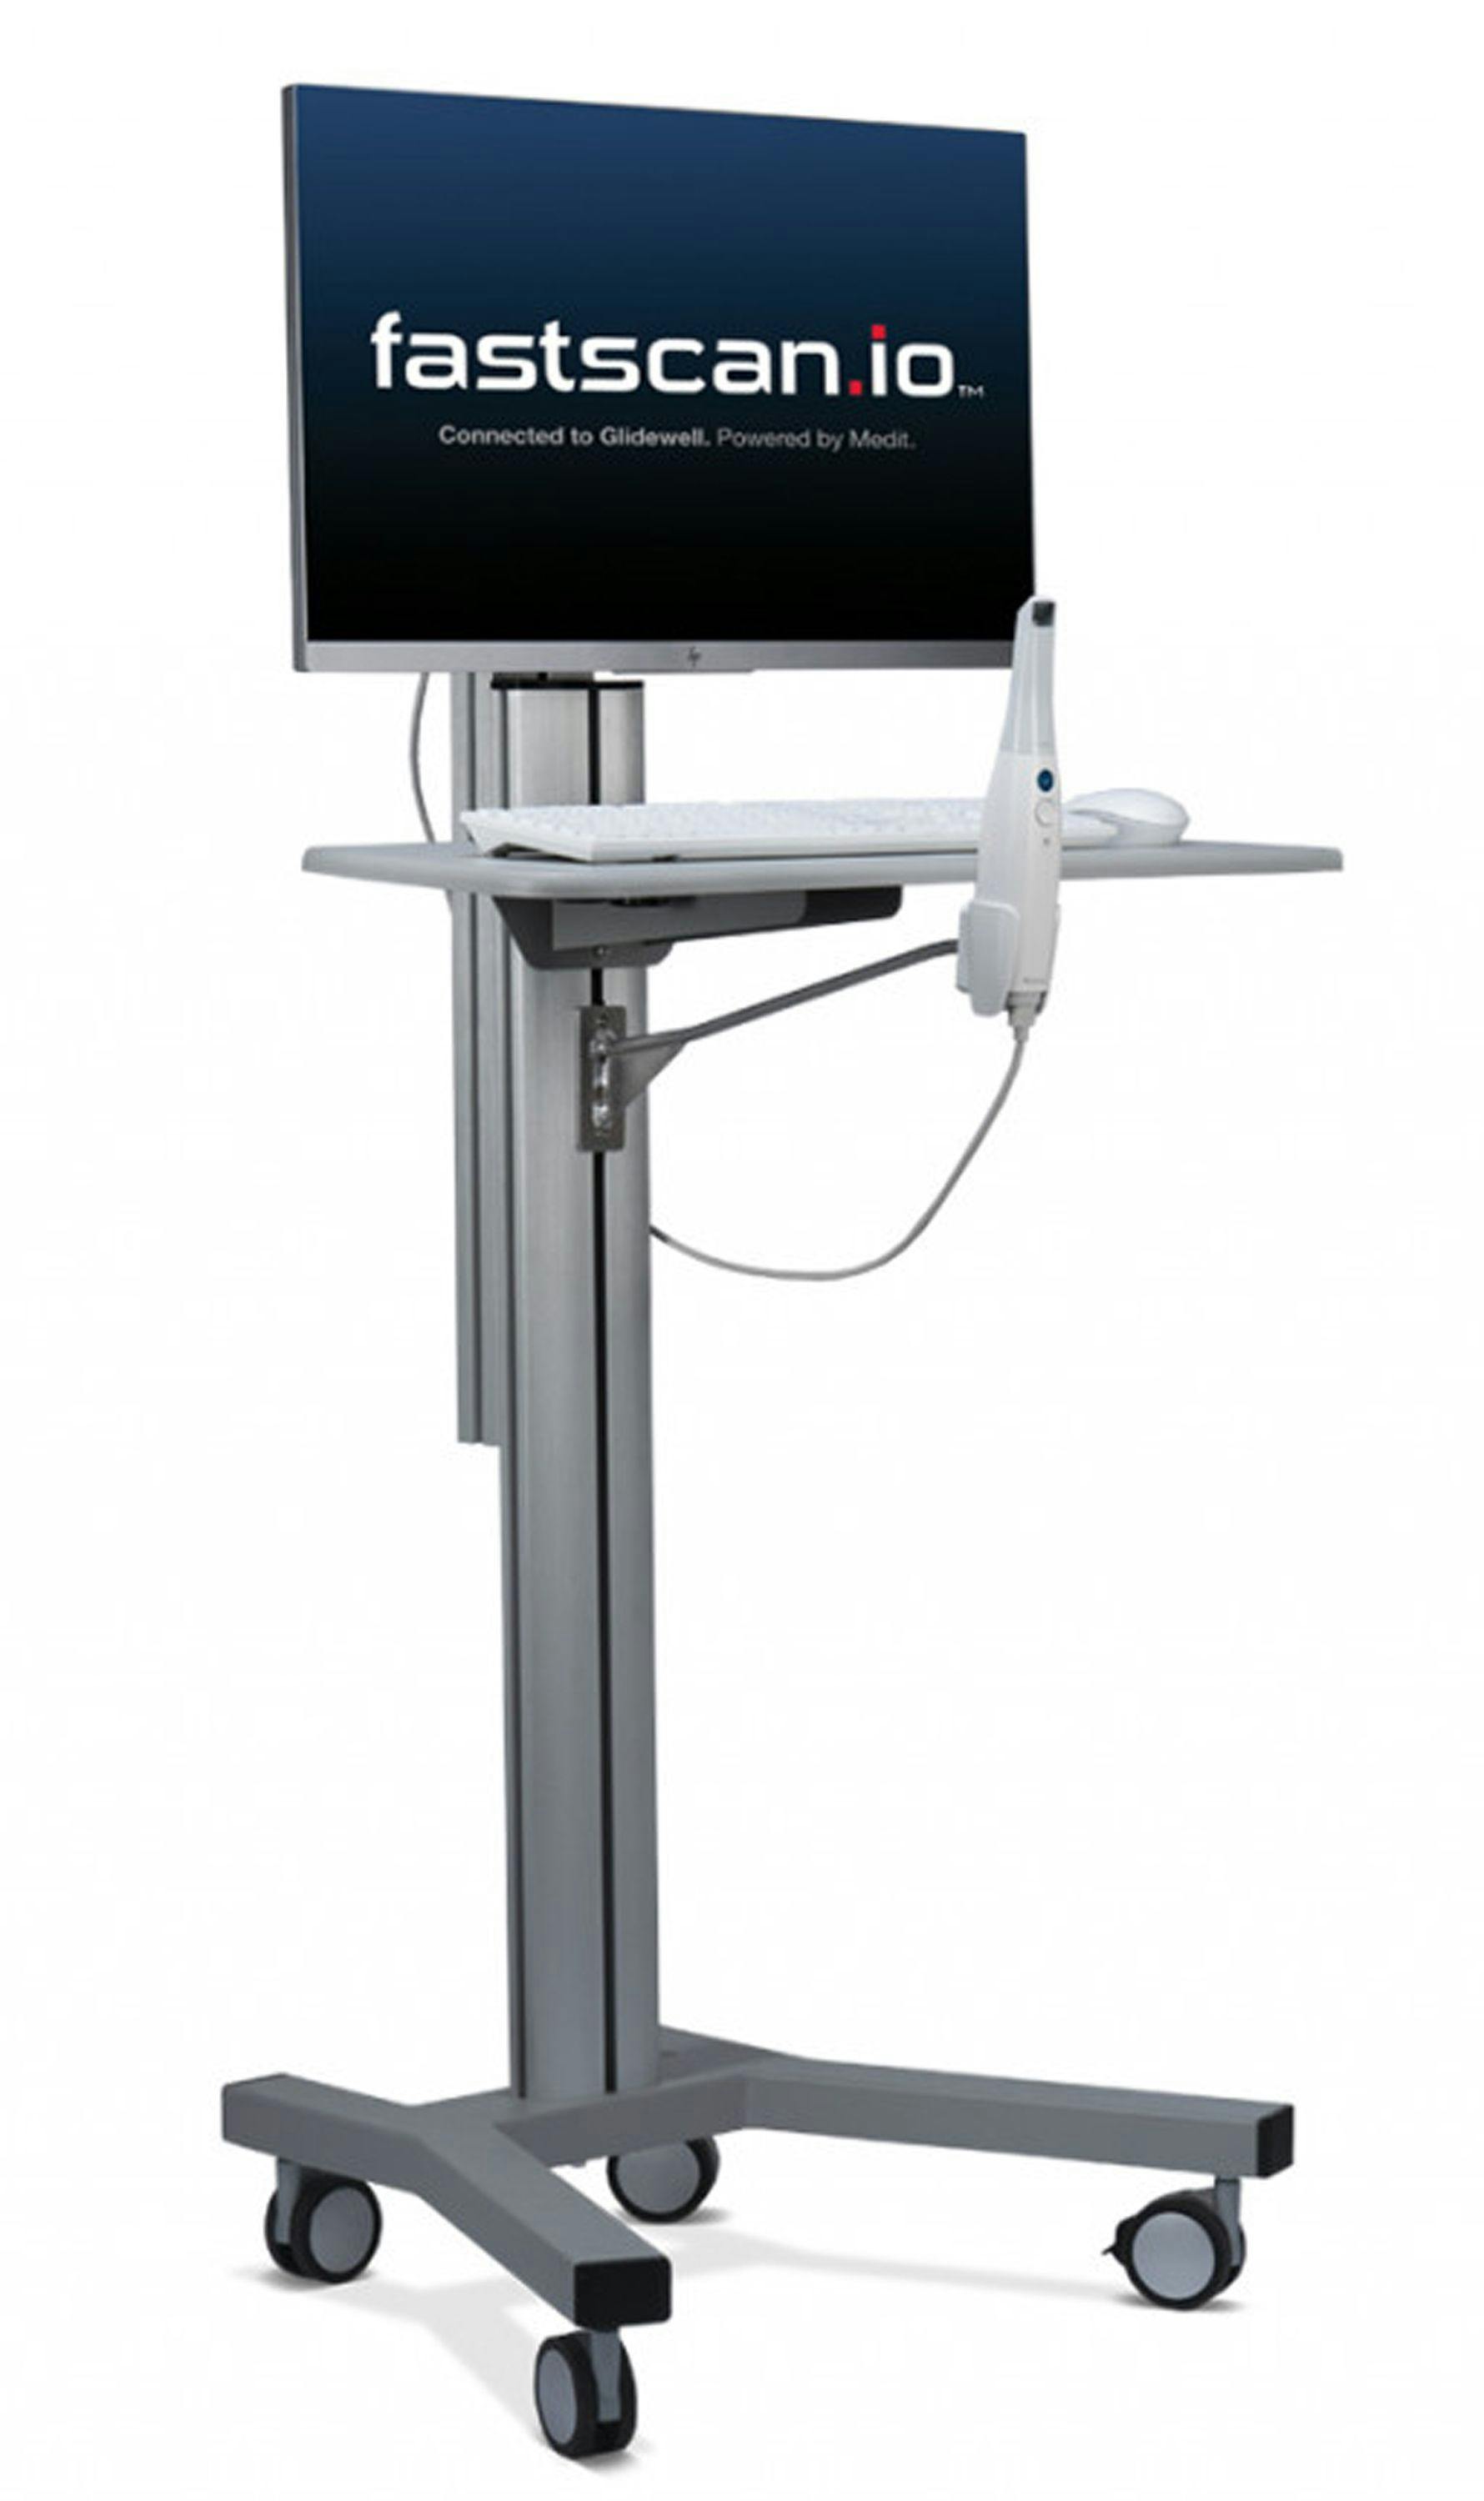 Glidewell and Medit Launch New fastscan.io Intraoral Scanner